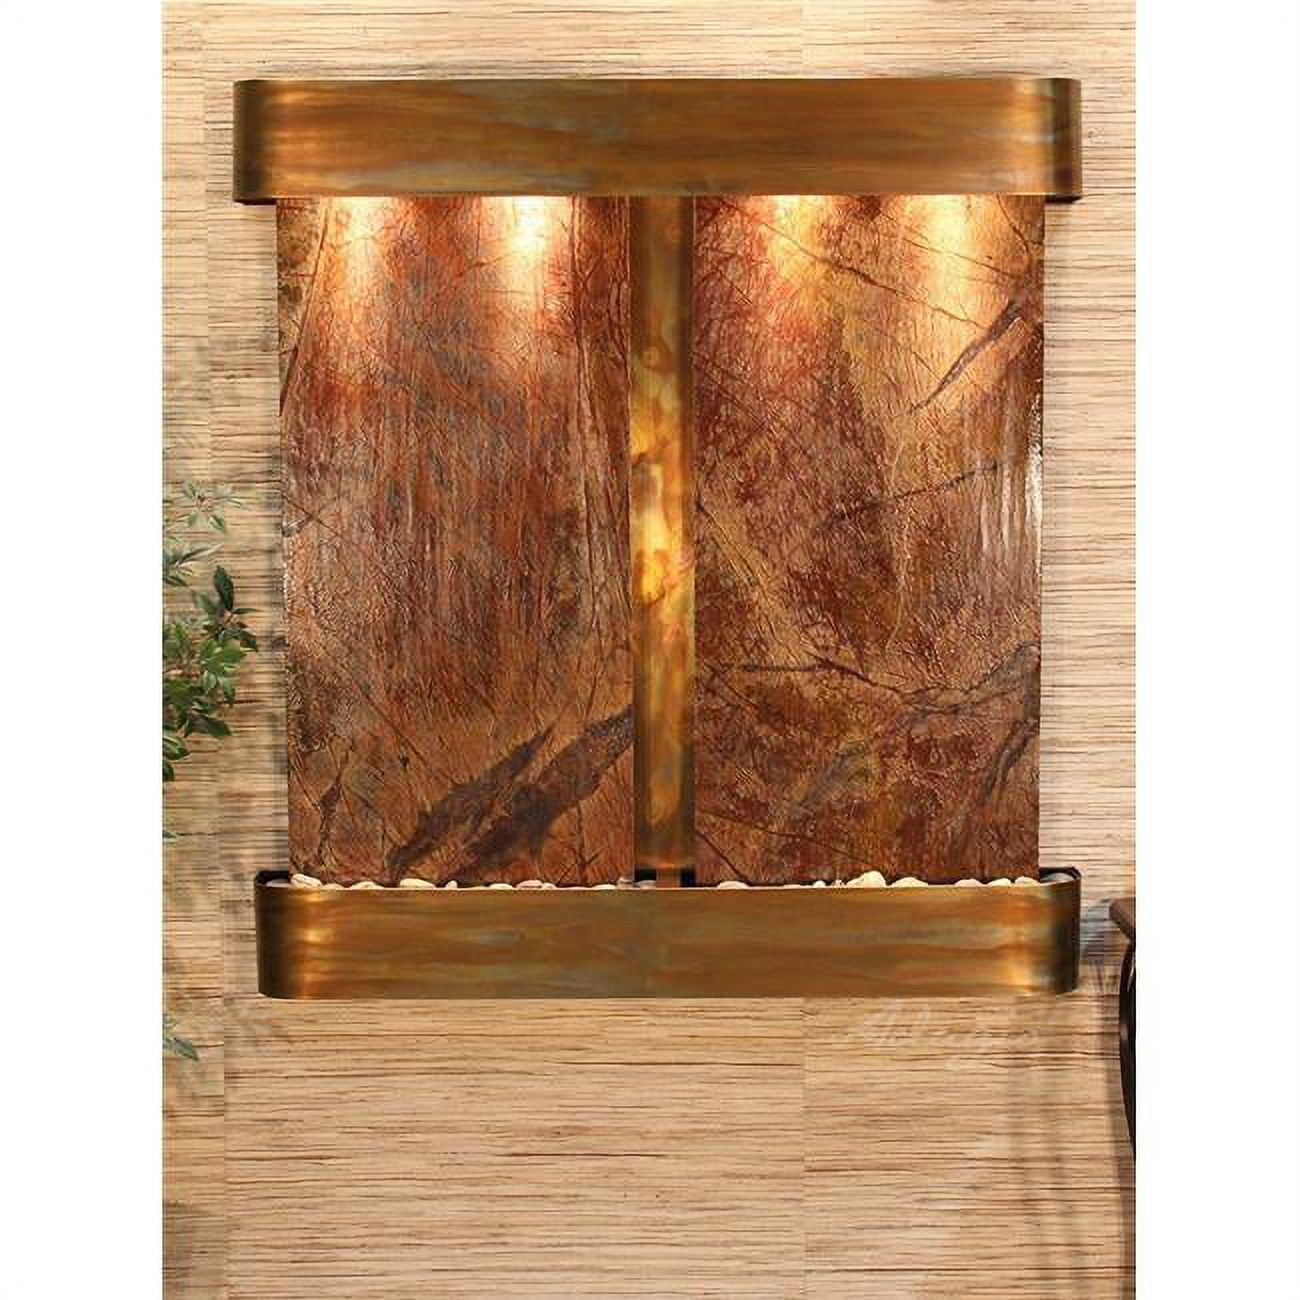 Picture of Adagio AFR1006 Aspen Falls Round Wall Fountain - Rustic Copper-Brown Marble